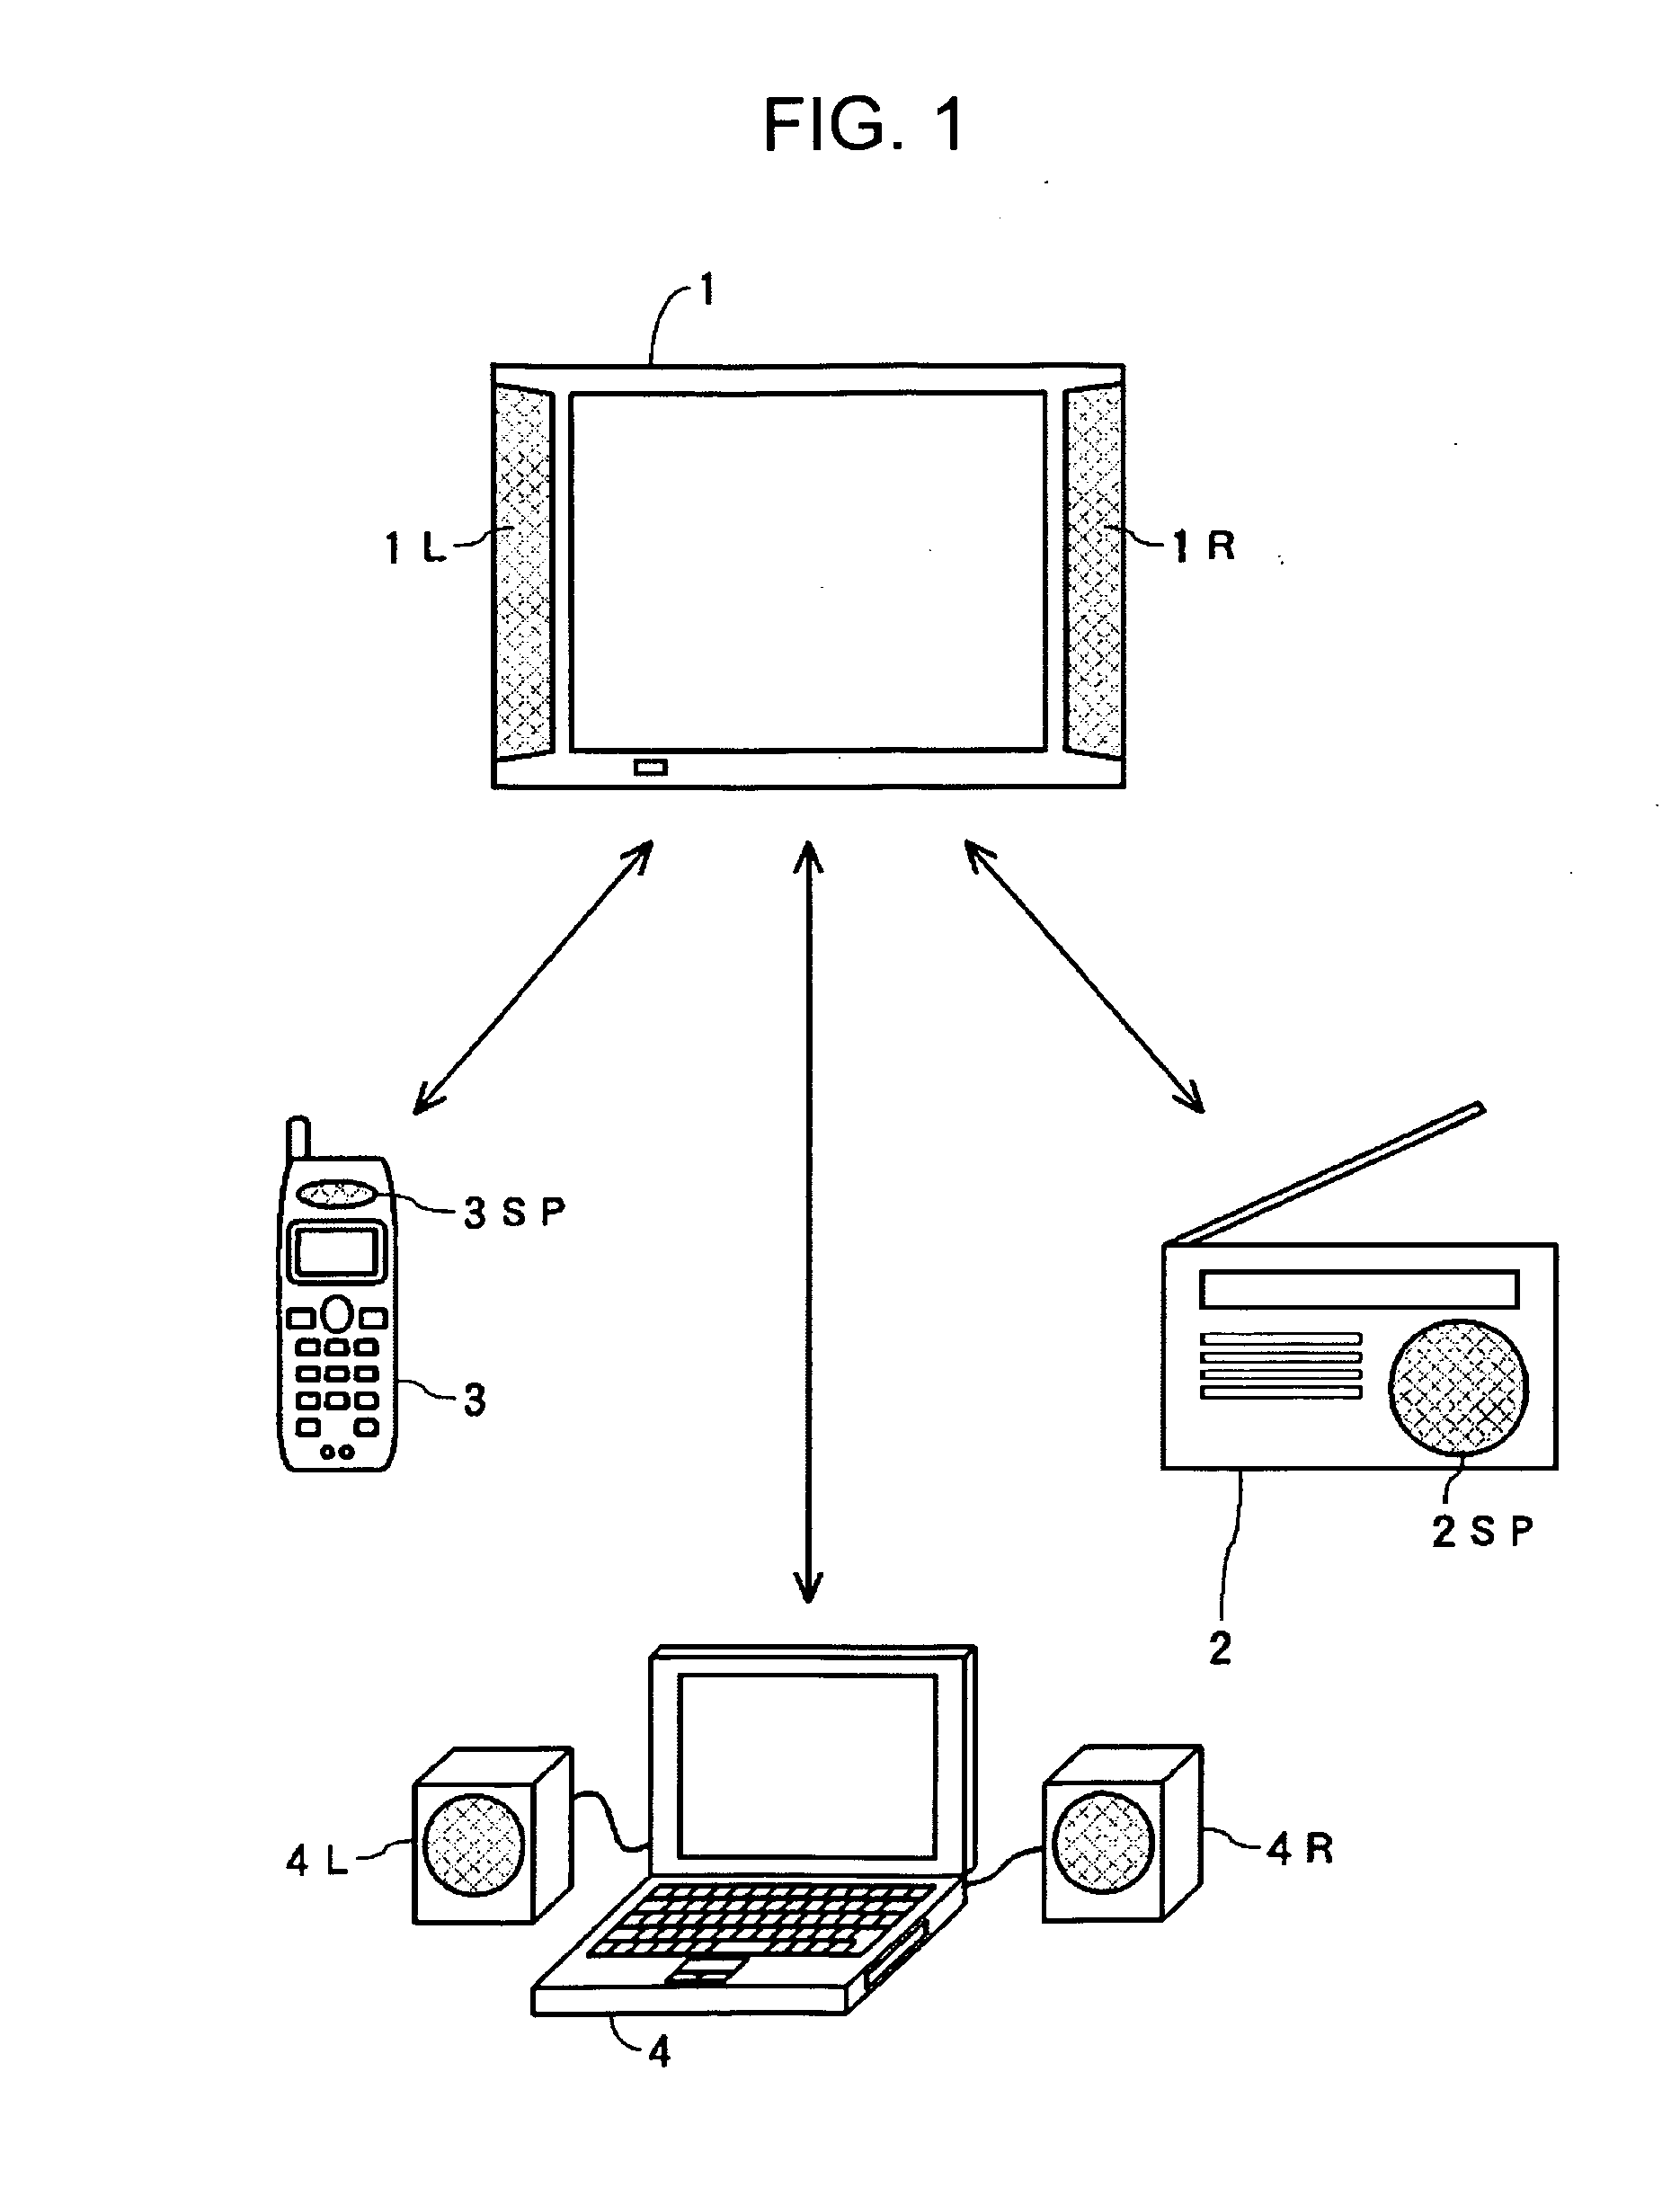 Transmitting/receiving system, transmitting device, and device including speaker